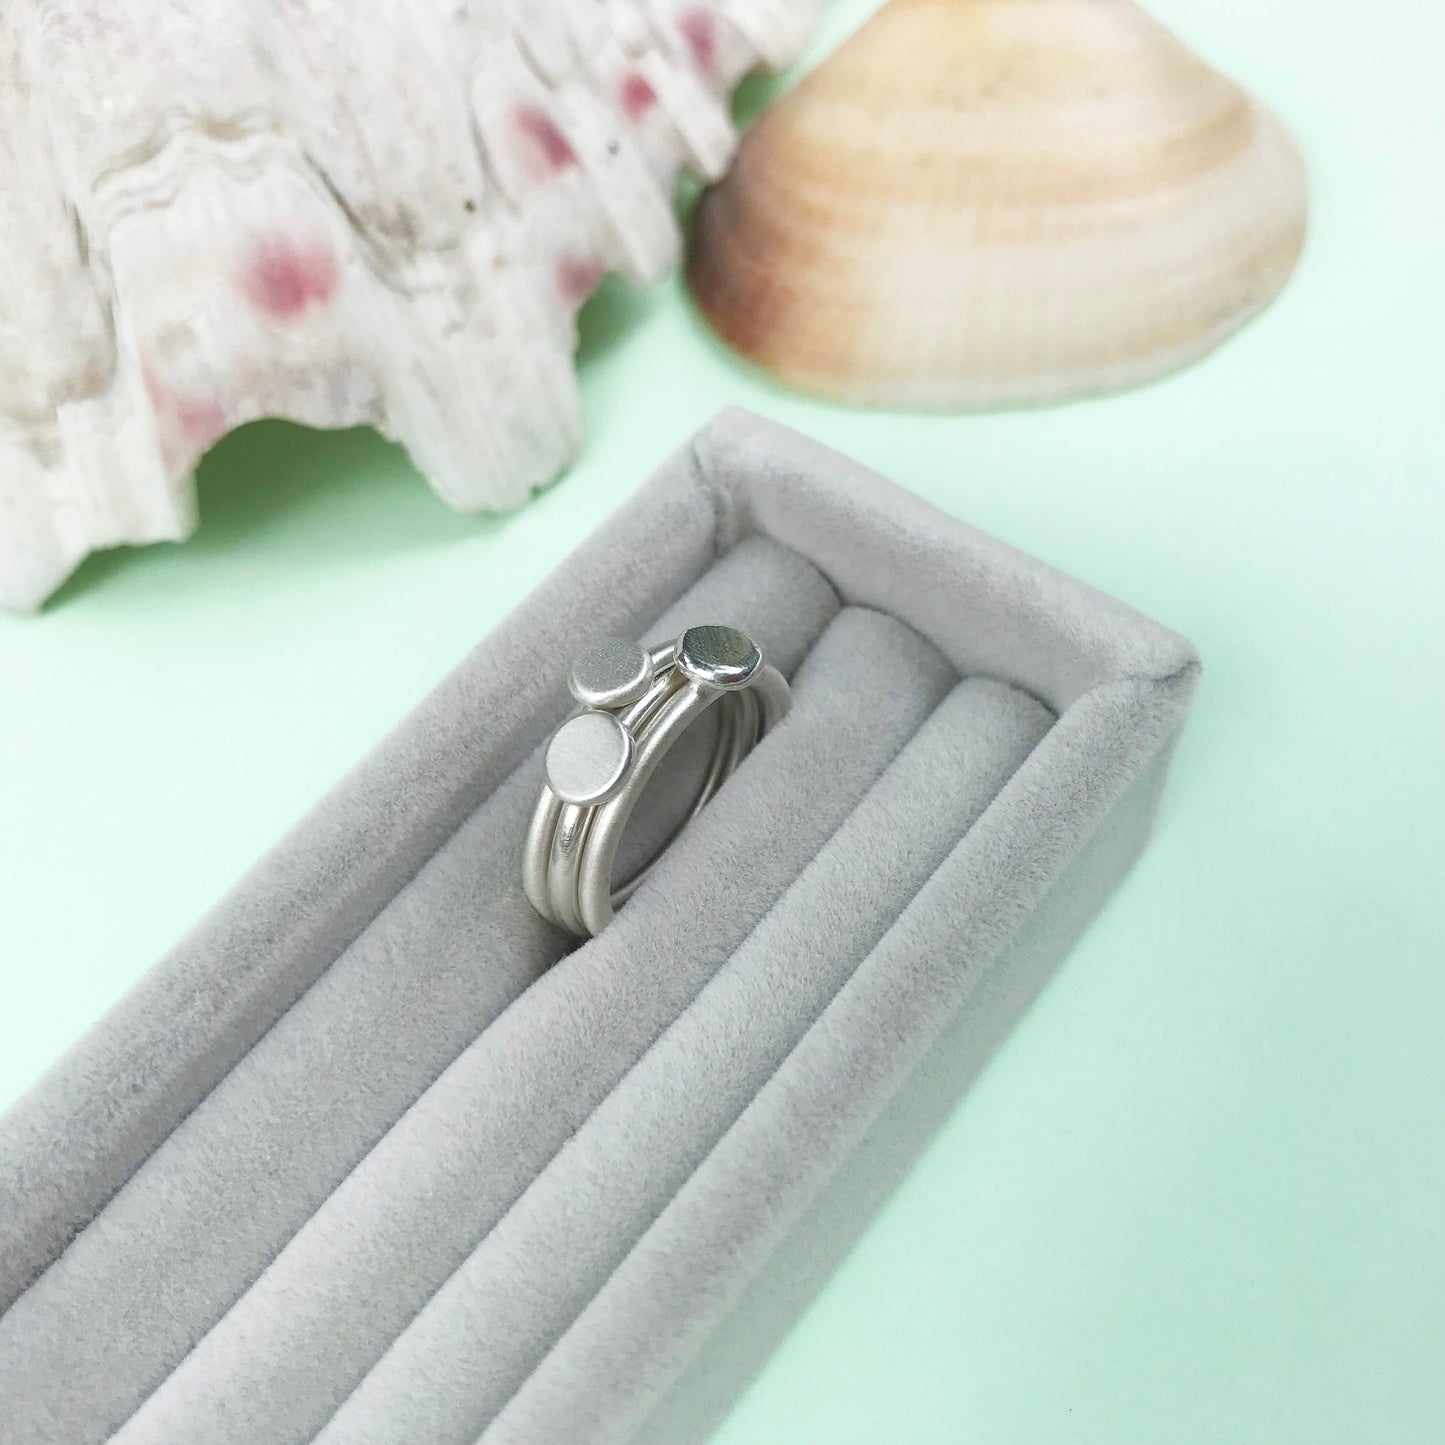 silver bubble stacking ring, sterling silver bubble ring, silver bubble ring, sterling silver wire, matt silver bubble ring, polished silver bubble ring, silver stacking ring, sterling silver stacking ring